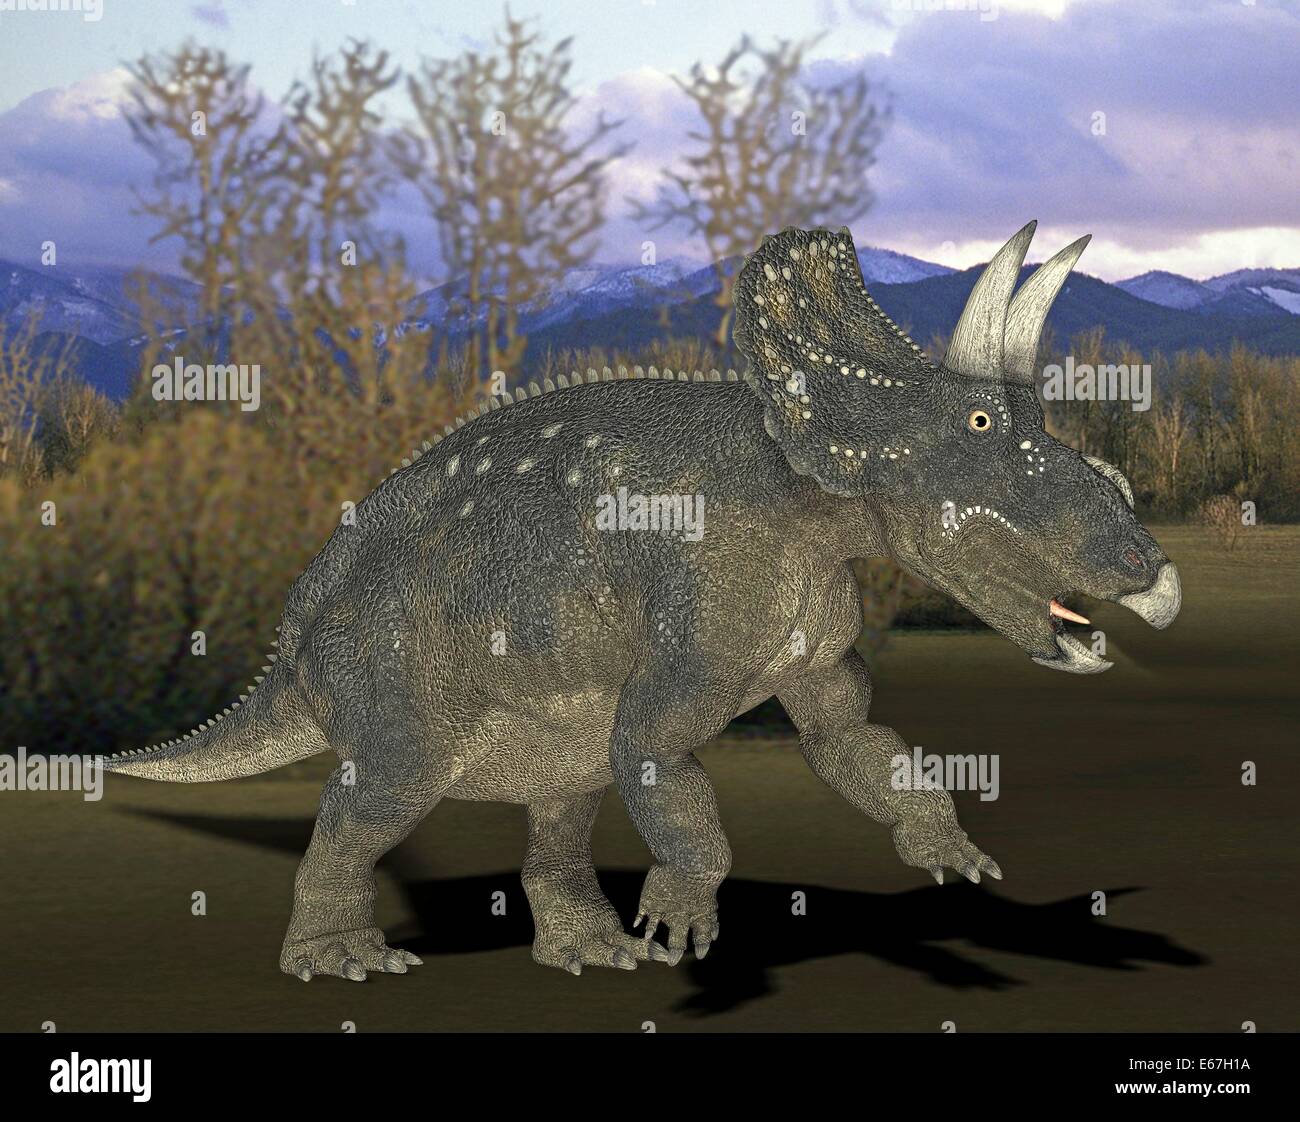 Dinosaur Dinosaurier Nedoceratops / Nedoceratops Banque D'Images